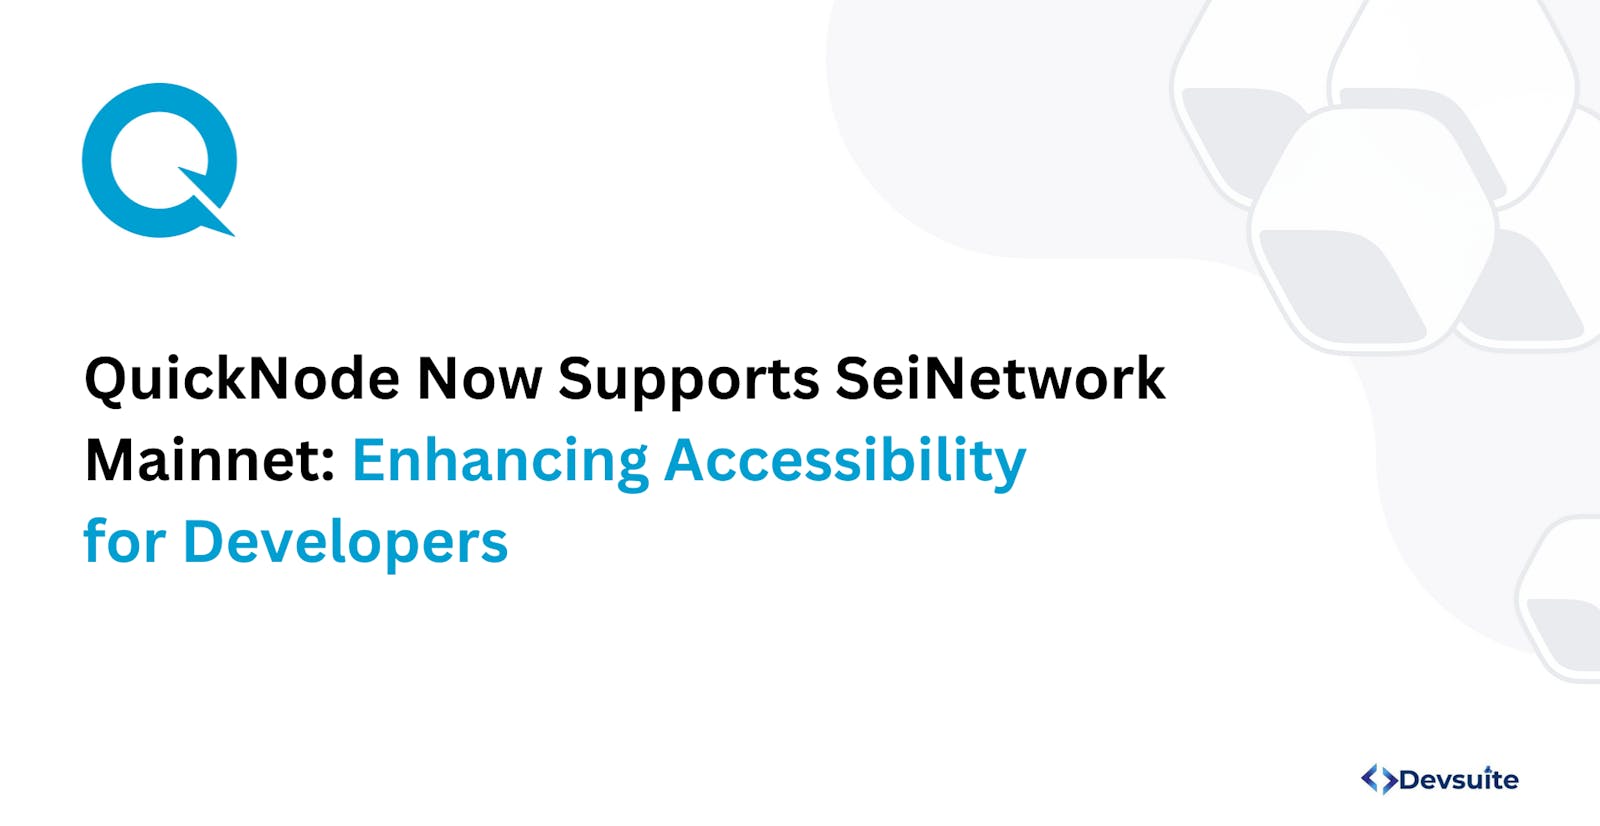 QuickNode Now Supports SeiNetwork Mainnet: Enhancing Accessibility for Developers